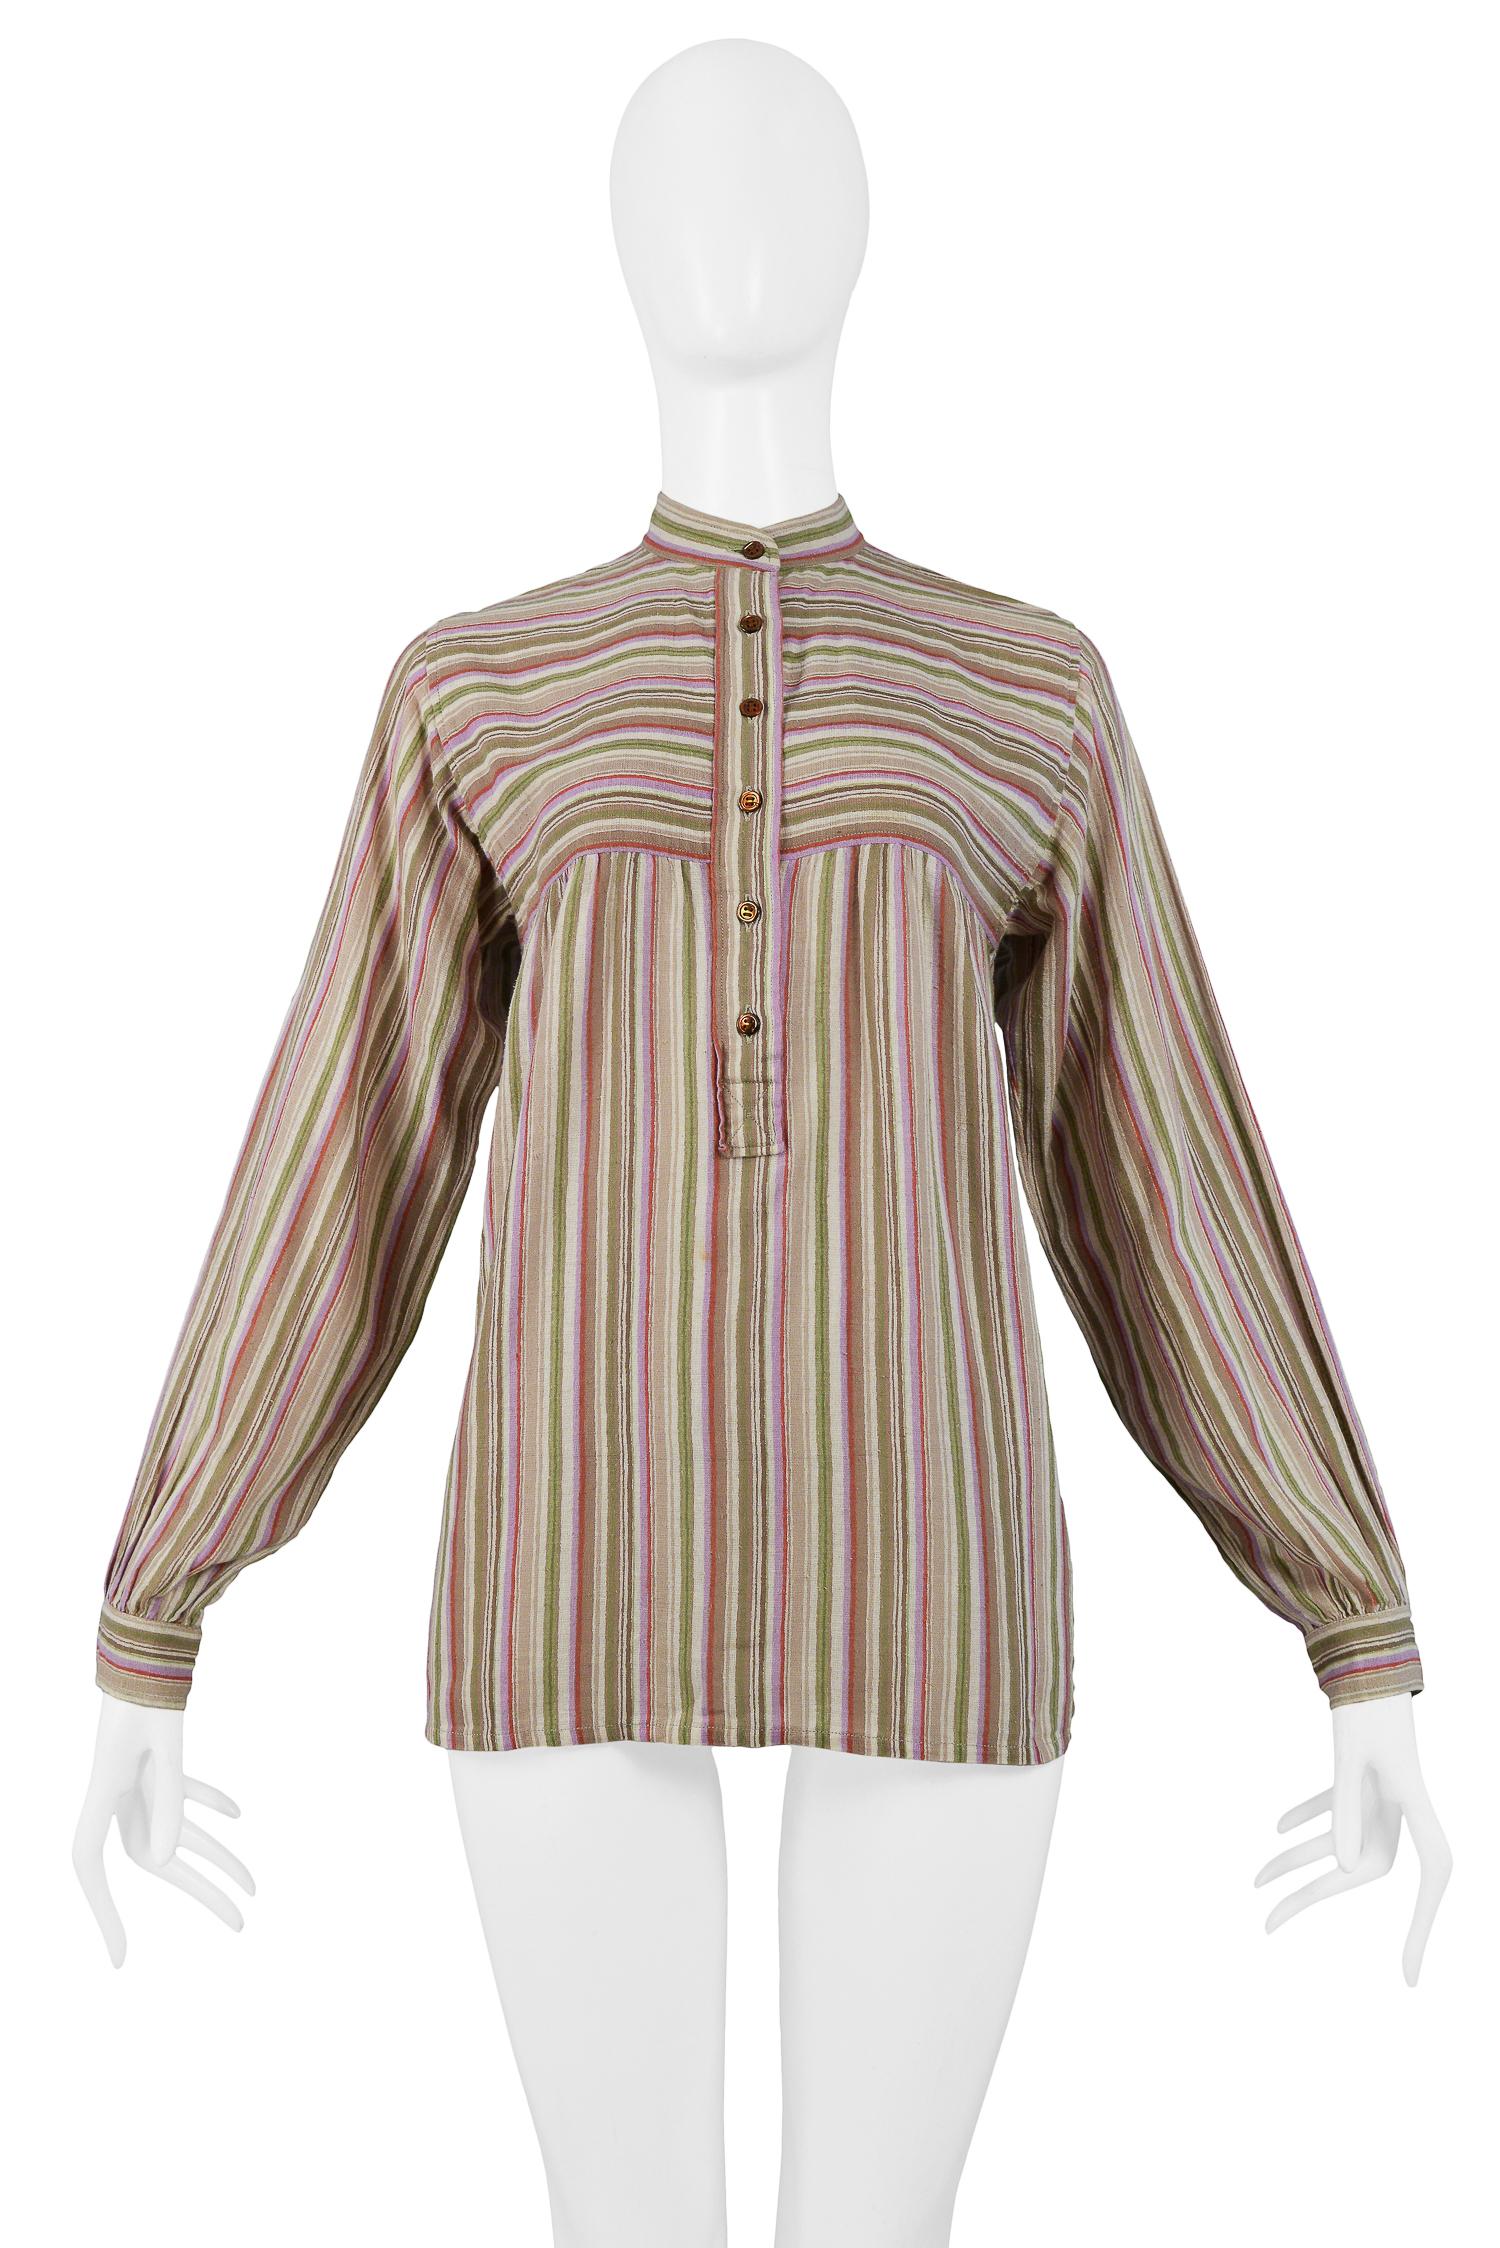 Resurrection Vintage is excited to offer a vintage Yves Saint Laurent brown stripe cotton blouse featuring button front placket, high collar, and button cuff detailing at wrists.

Yves Saint Laurent
Size 36
Cotton
Excellent Vintage